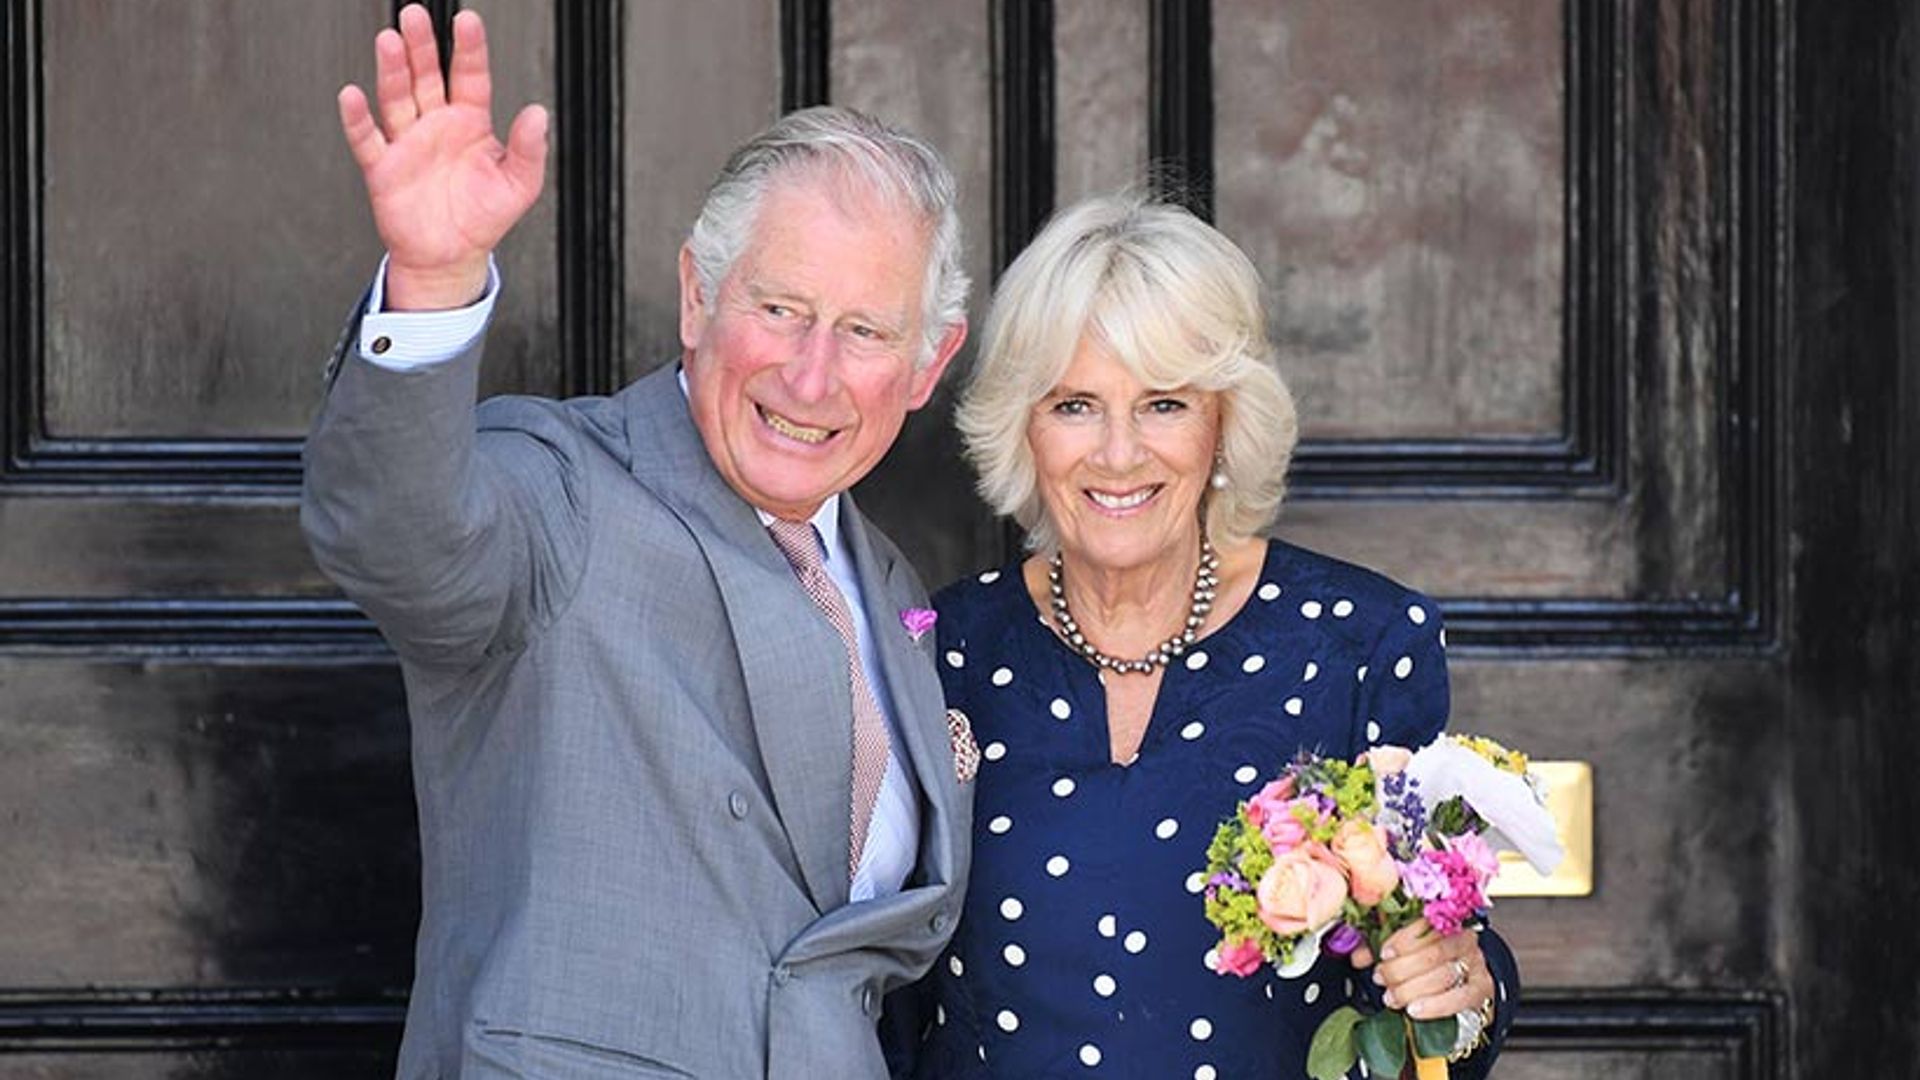 camilla parker bowles spotted dress